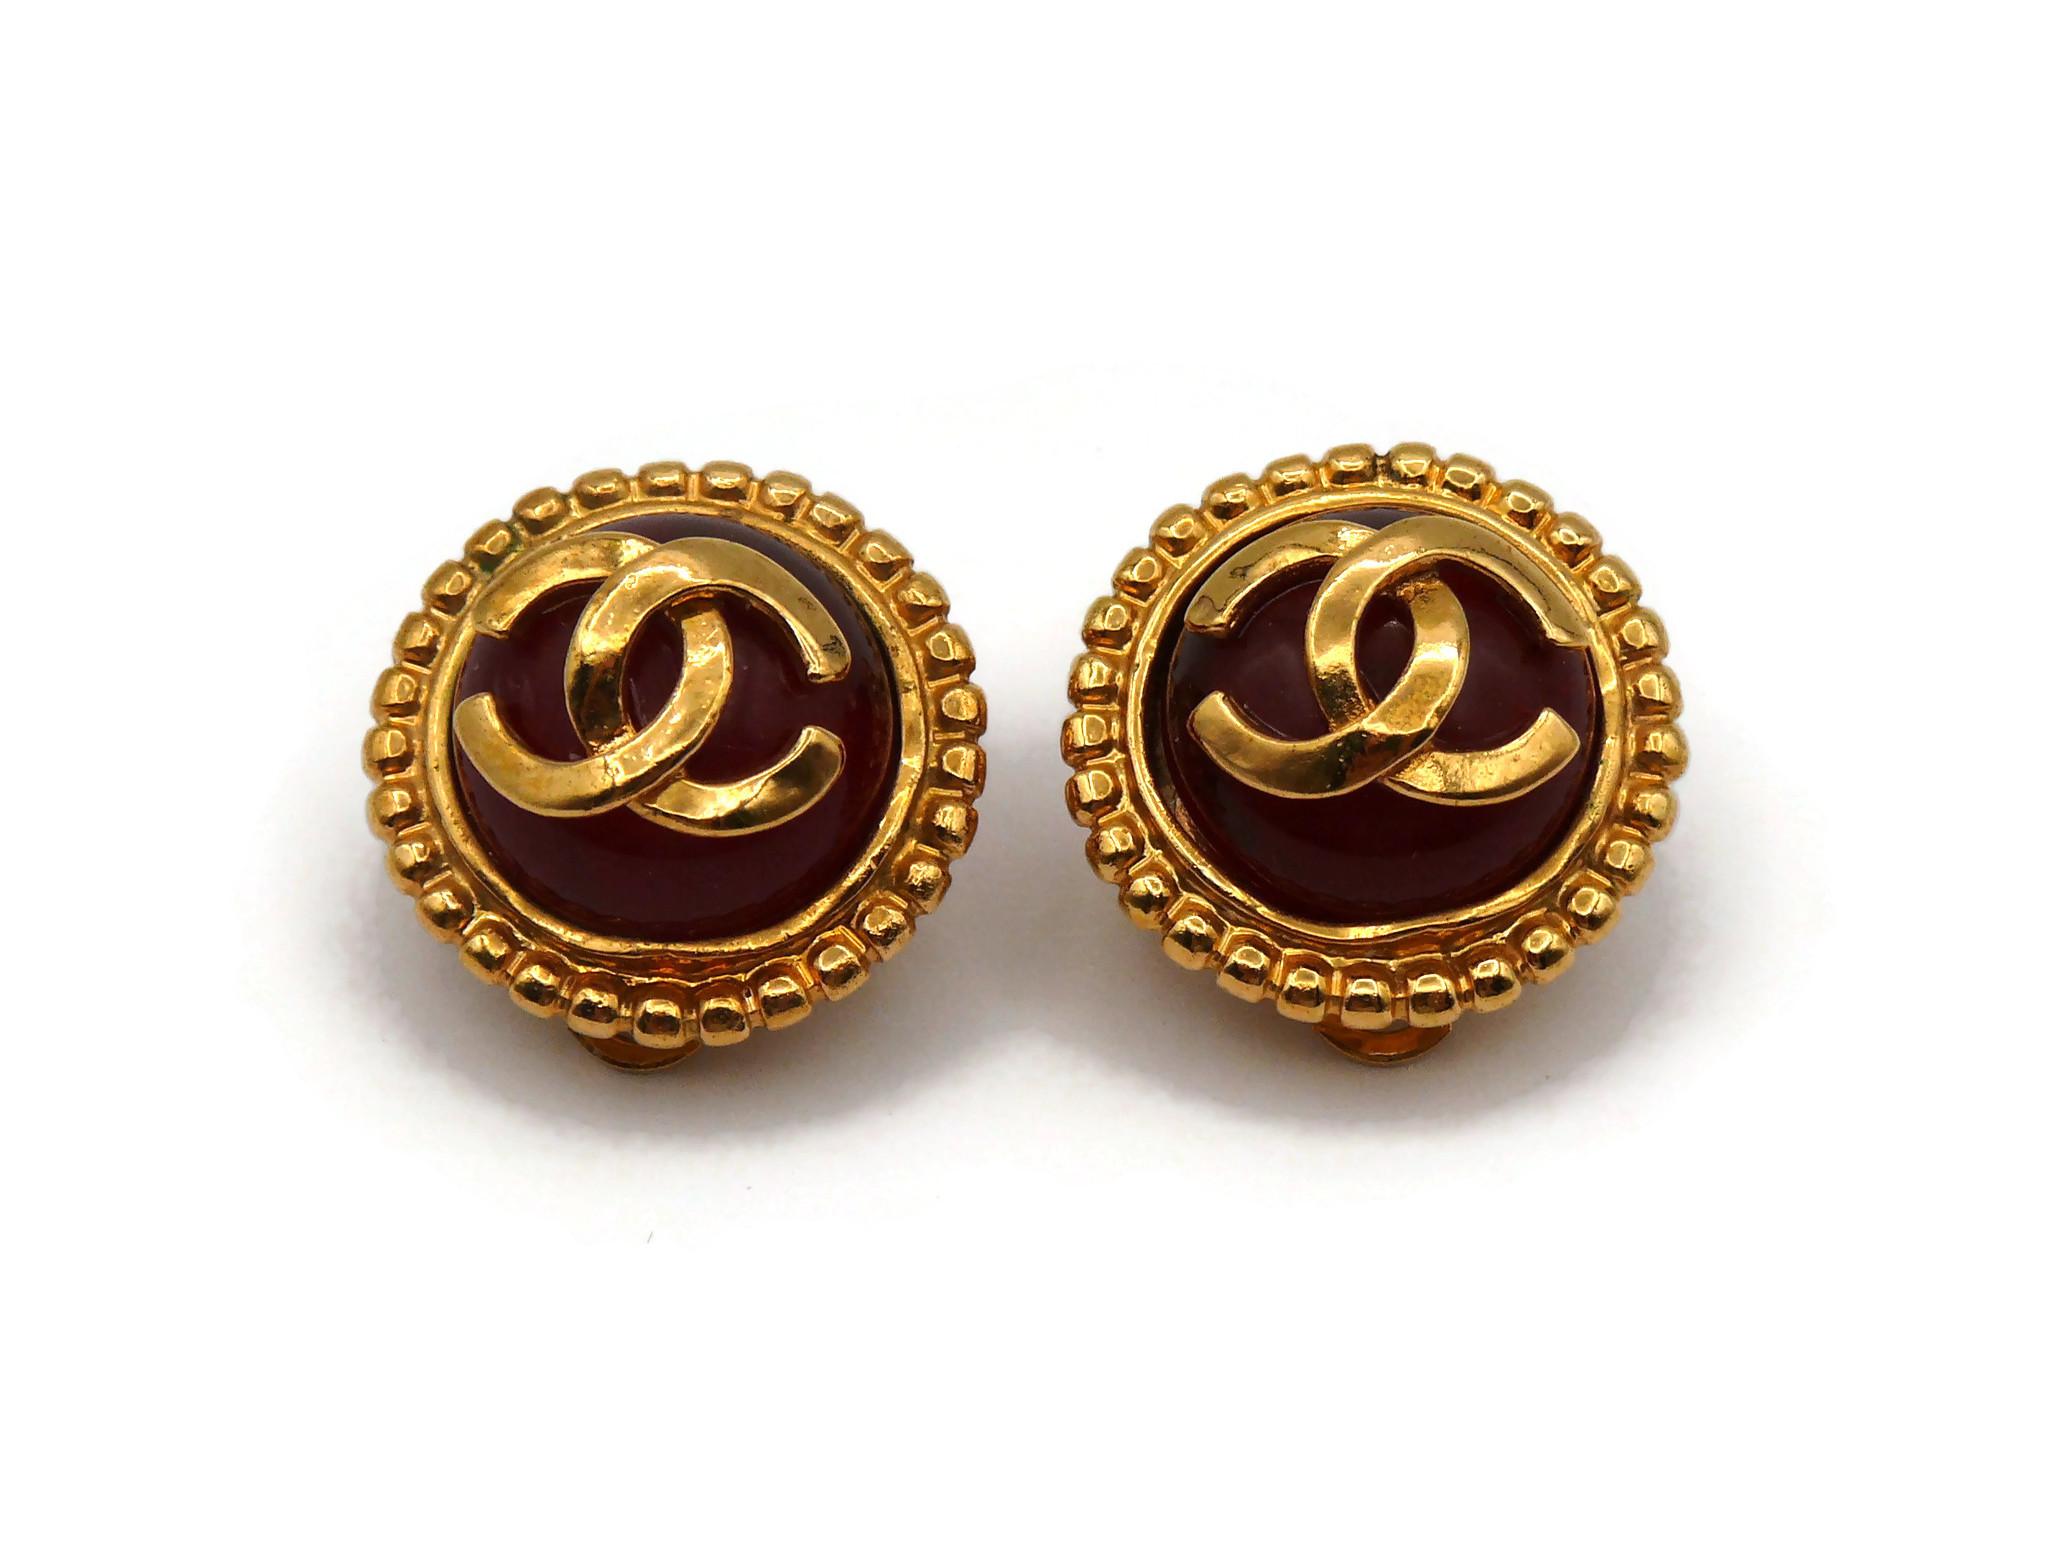 CHANEL by KARL LAGERFELD Vintage Gripoix CC Clip-On Earrings, 1997 For Sale 1